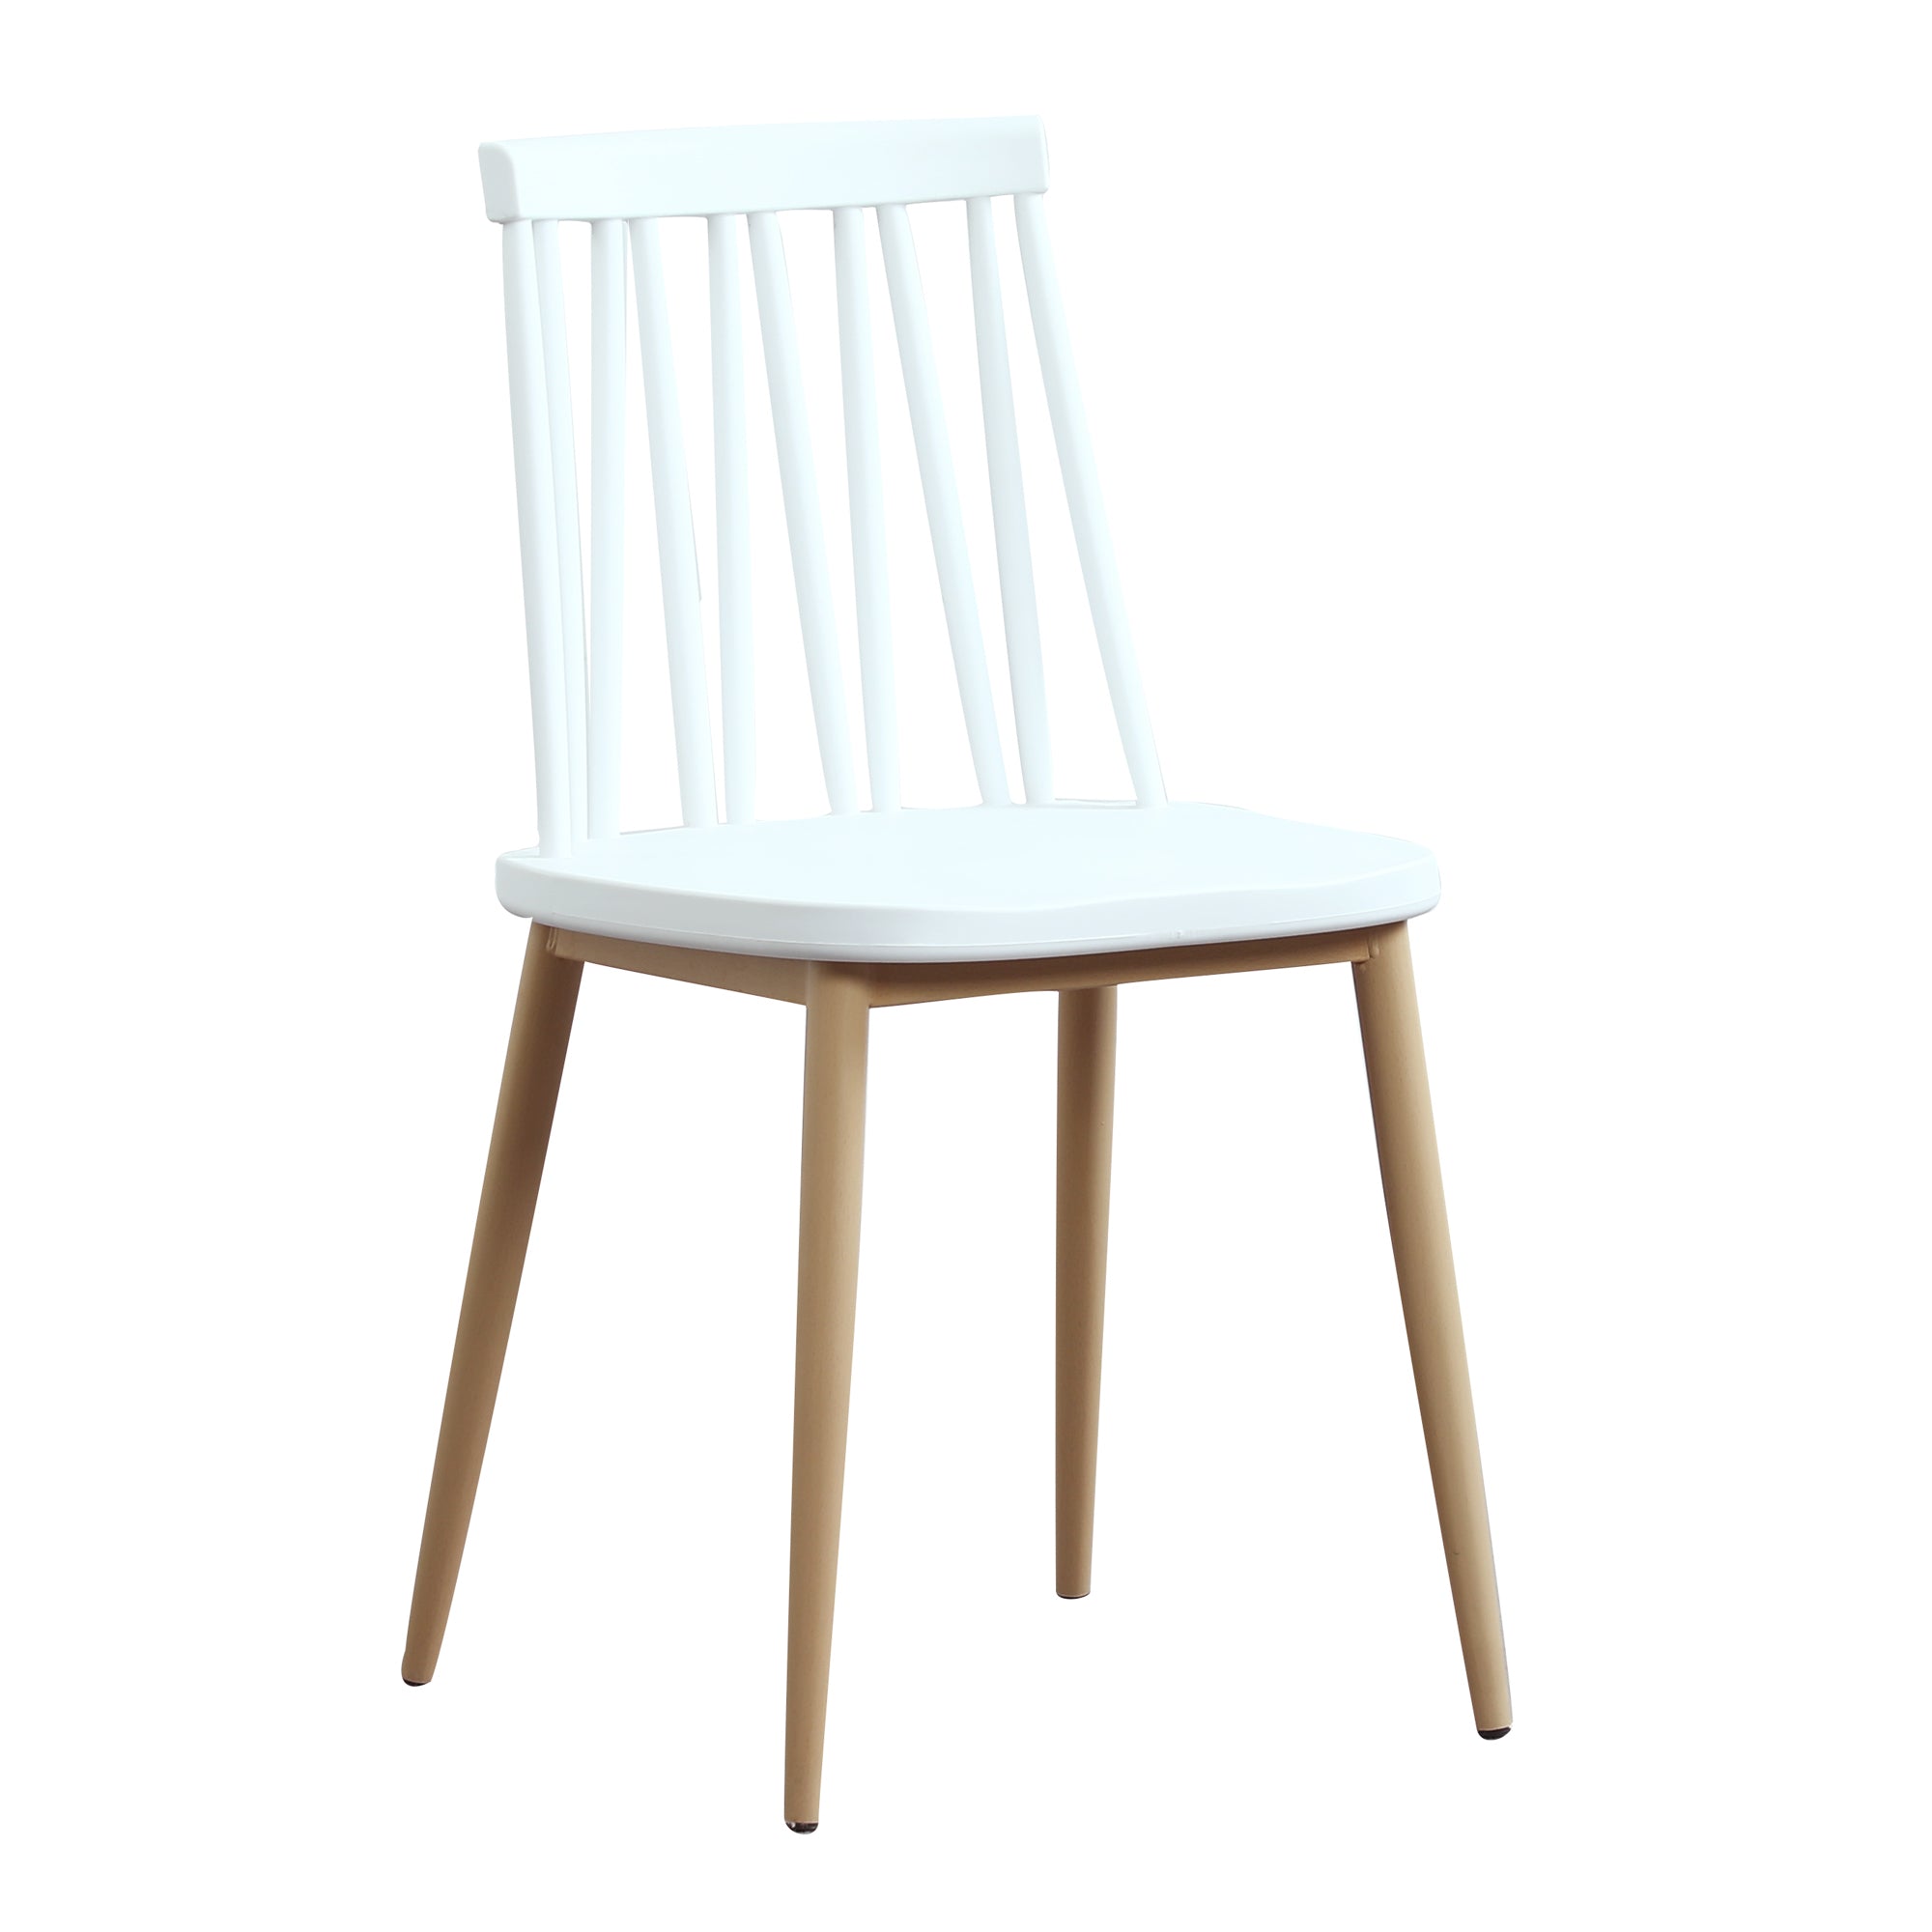 Teddys Collection Axl Dining Chair White And Wood Legs